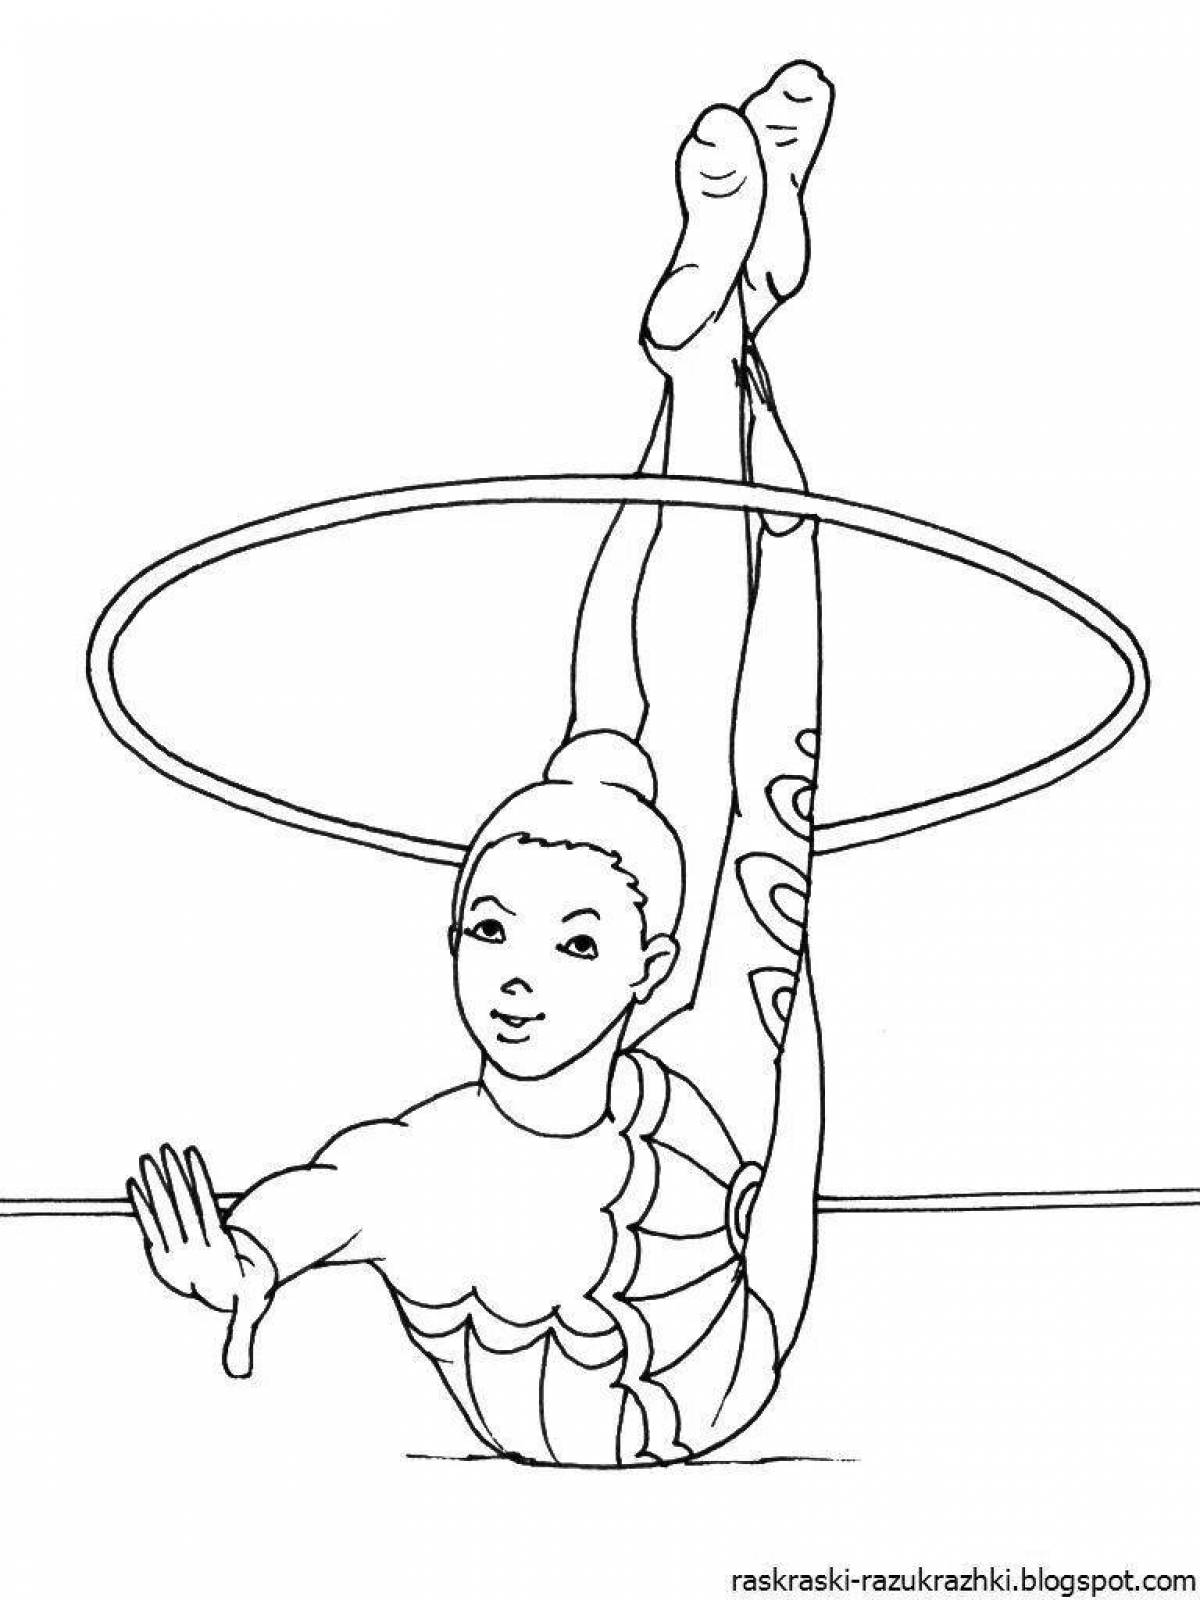 Great gymnastic coloring book for little ones